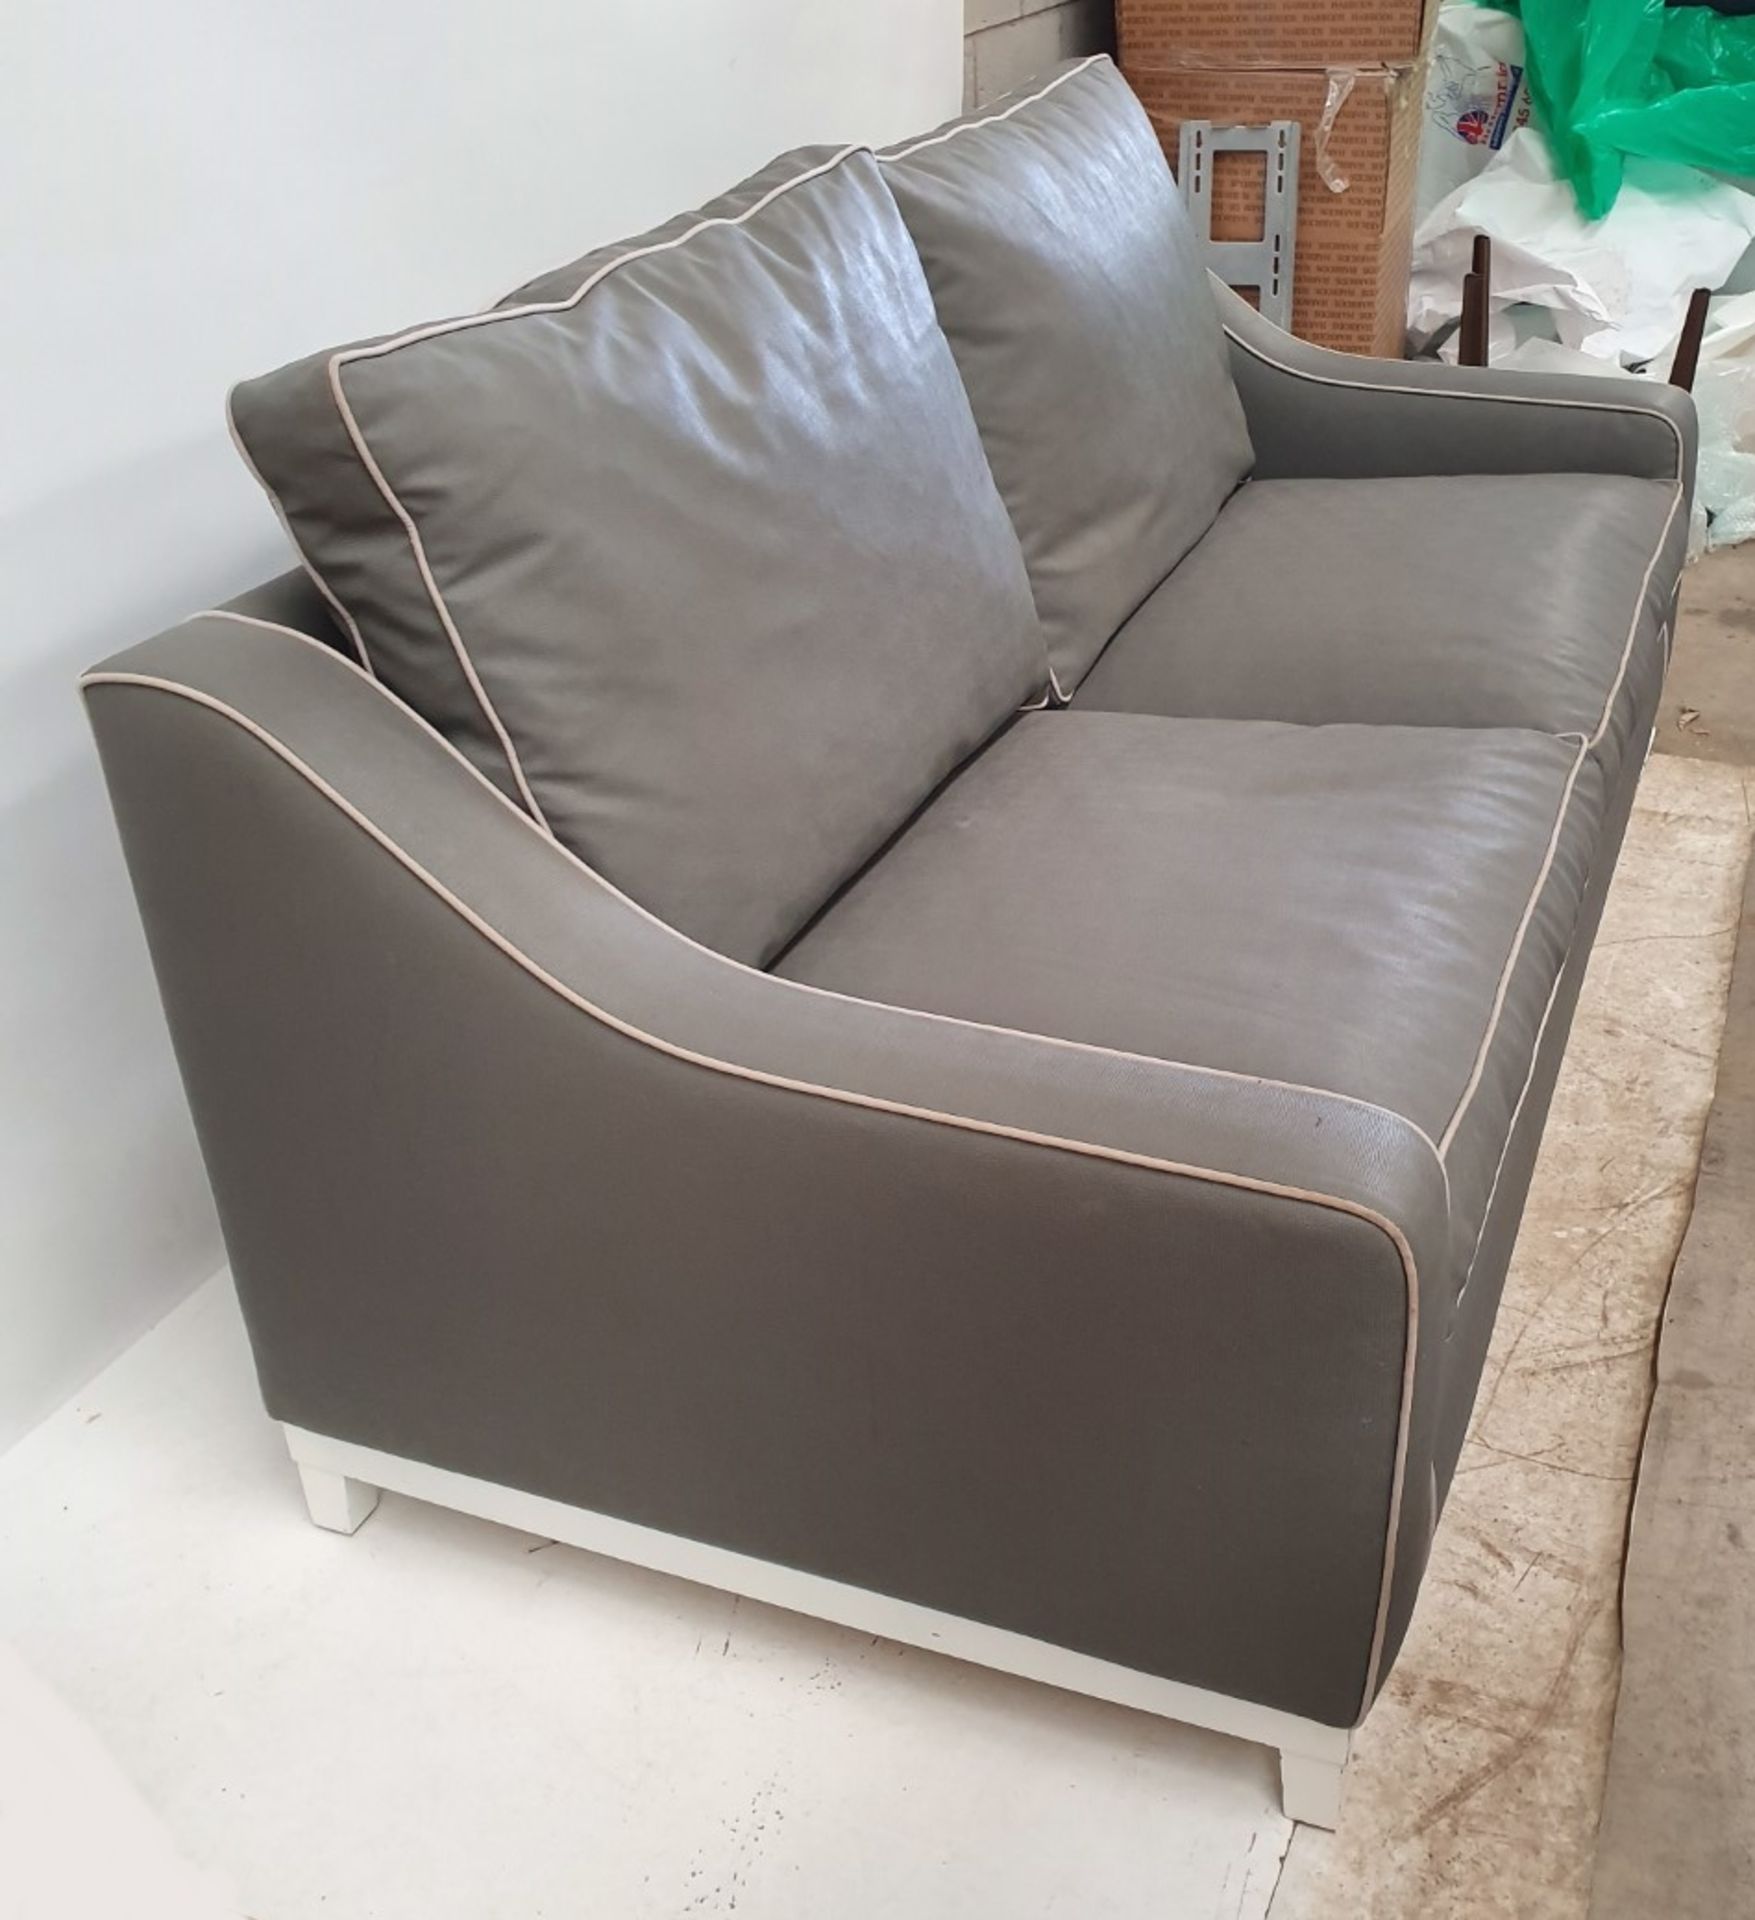 1 x Contemporary 2-Seater Grey Leather Sofa - CL380 - Ref: H581 - Location: Altrincham WA14 - NO VAT - Image 2 of 14